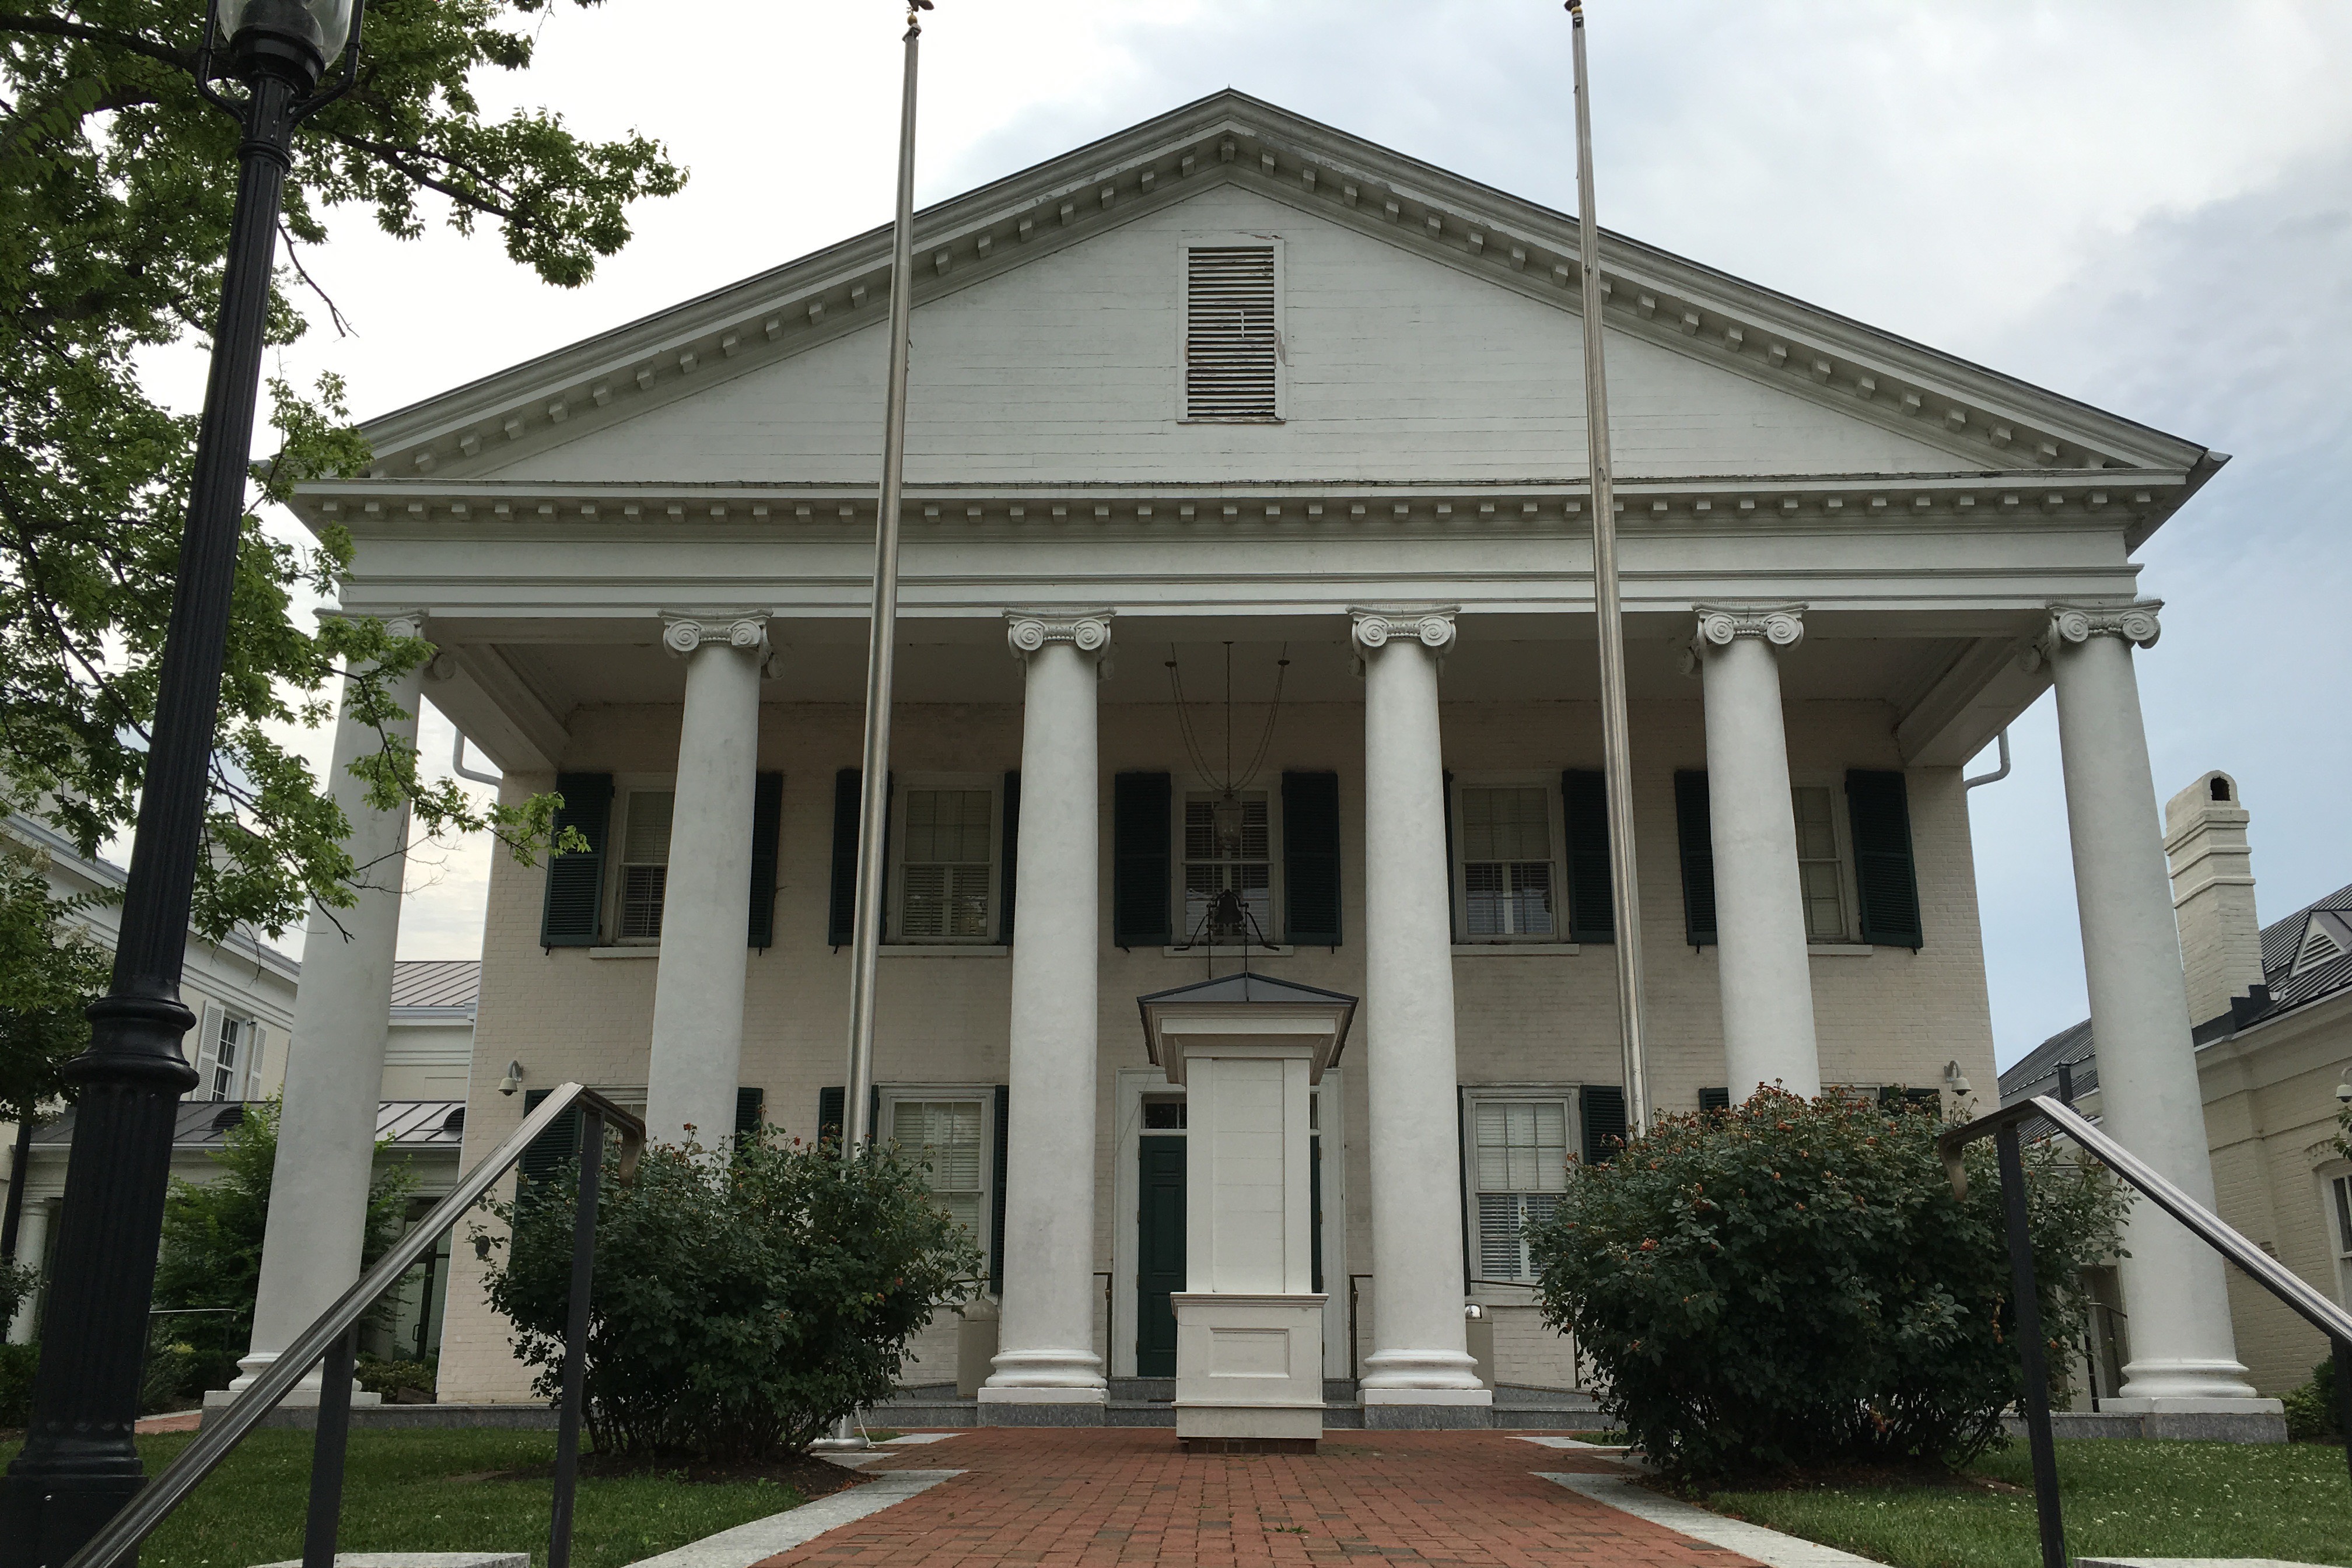 The Mecklenburg County Courthouse in Boydton, Virginia